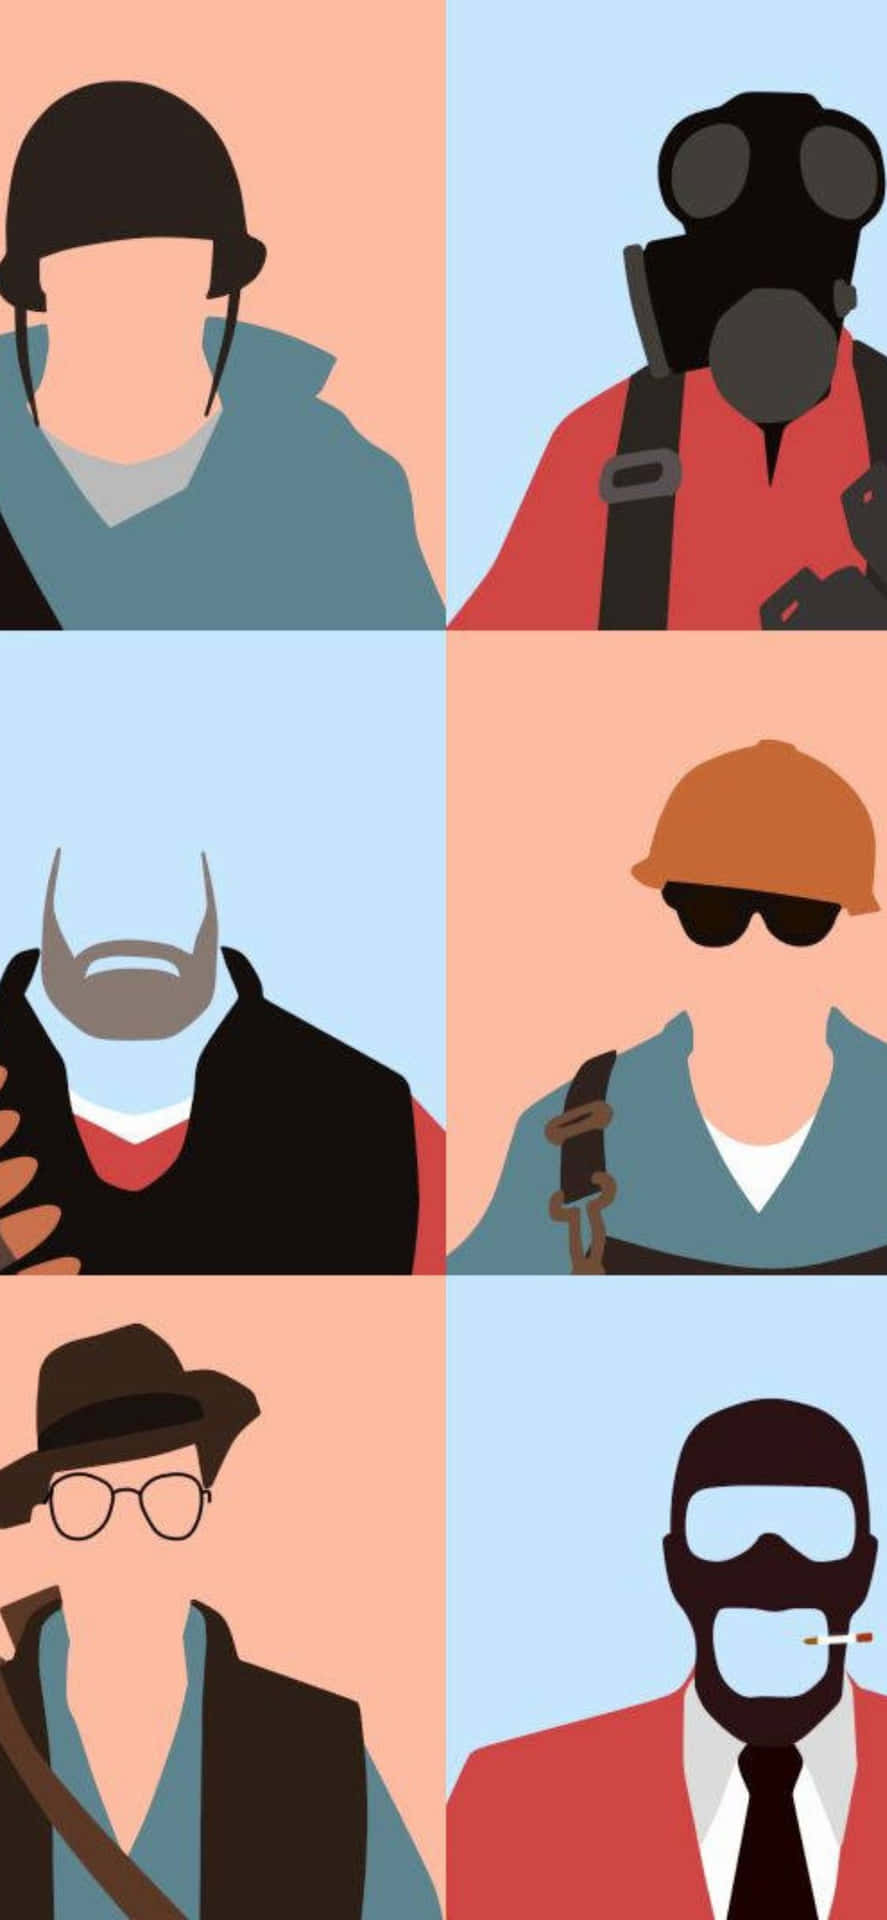 Iphone Xs Tf2 Background Colorful Silhouettes Of Characters